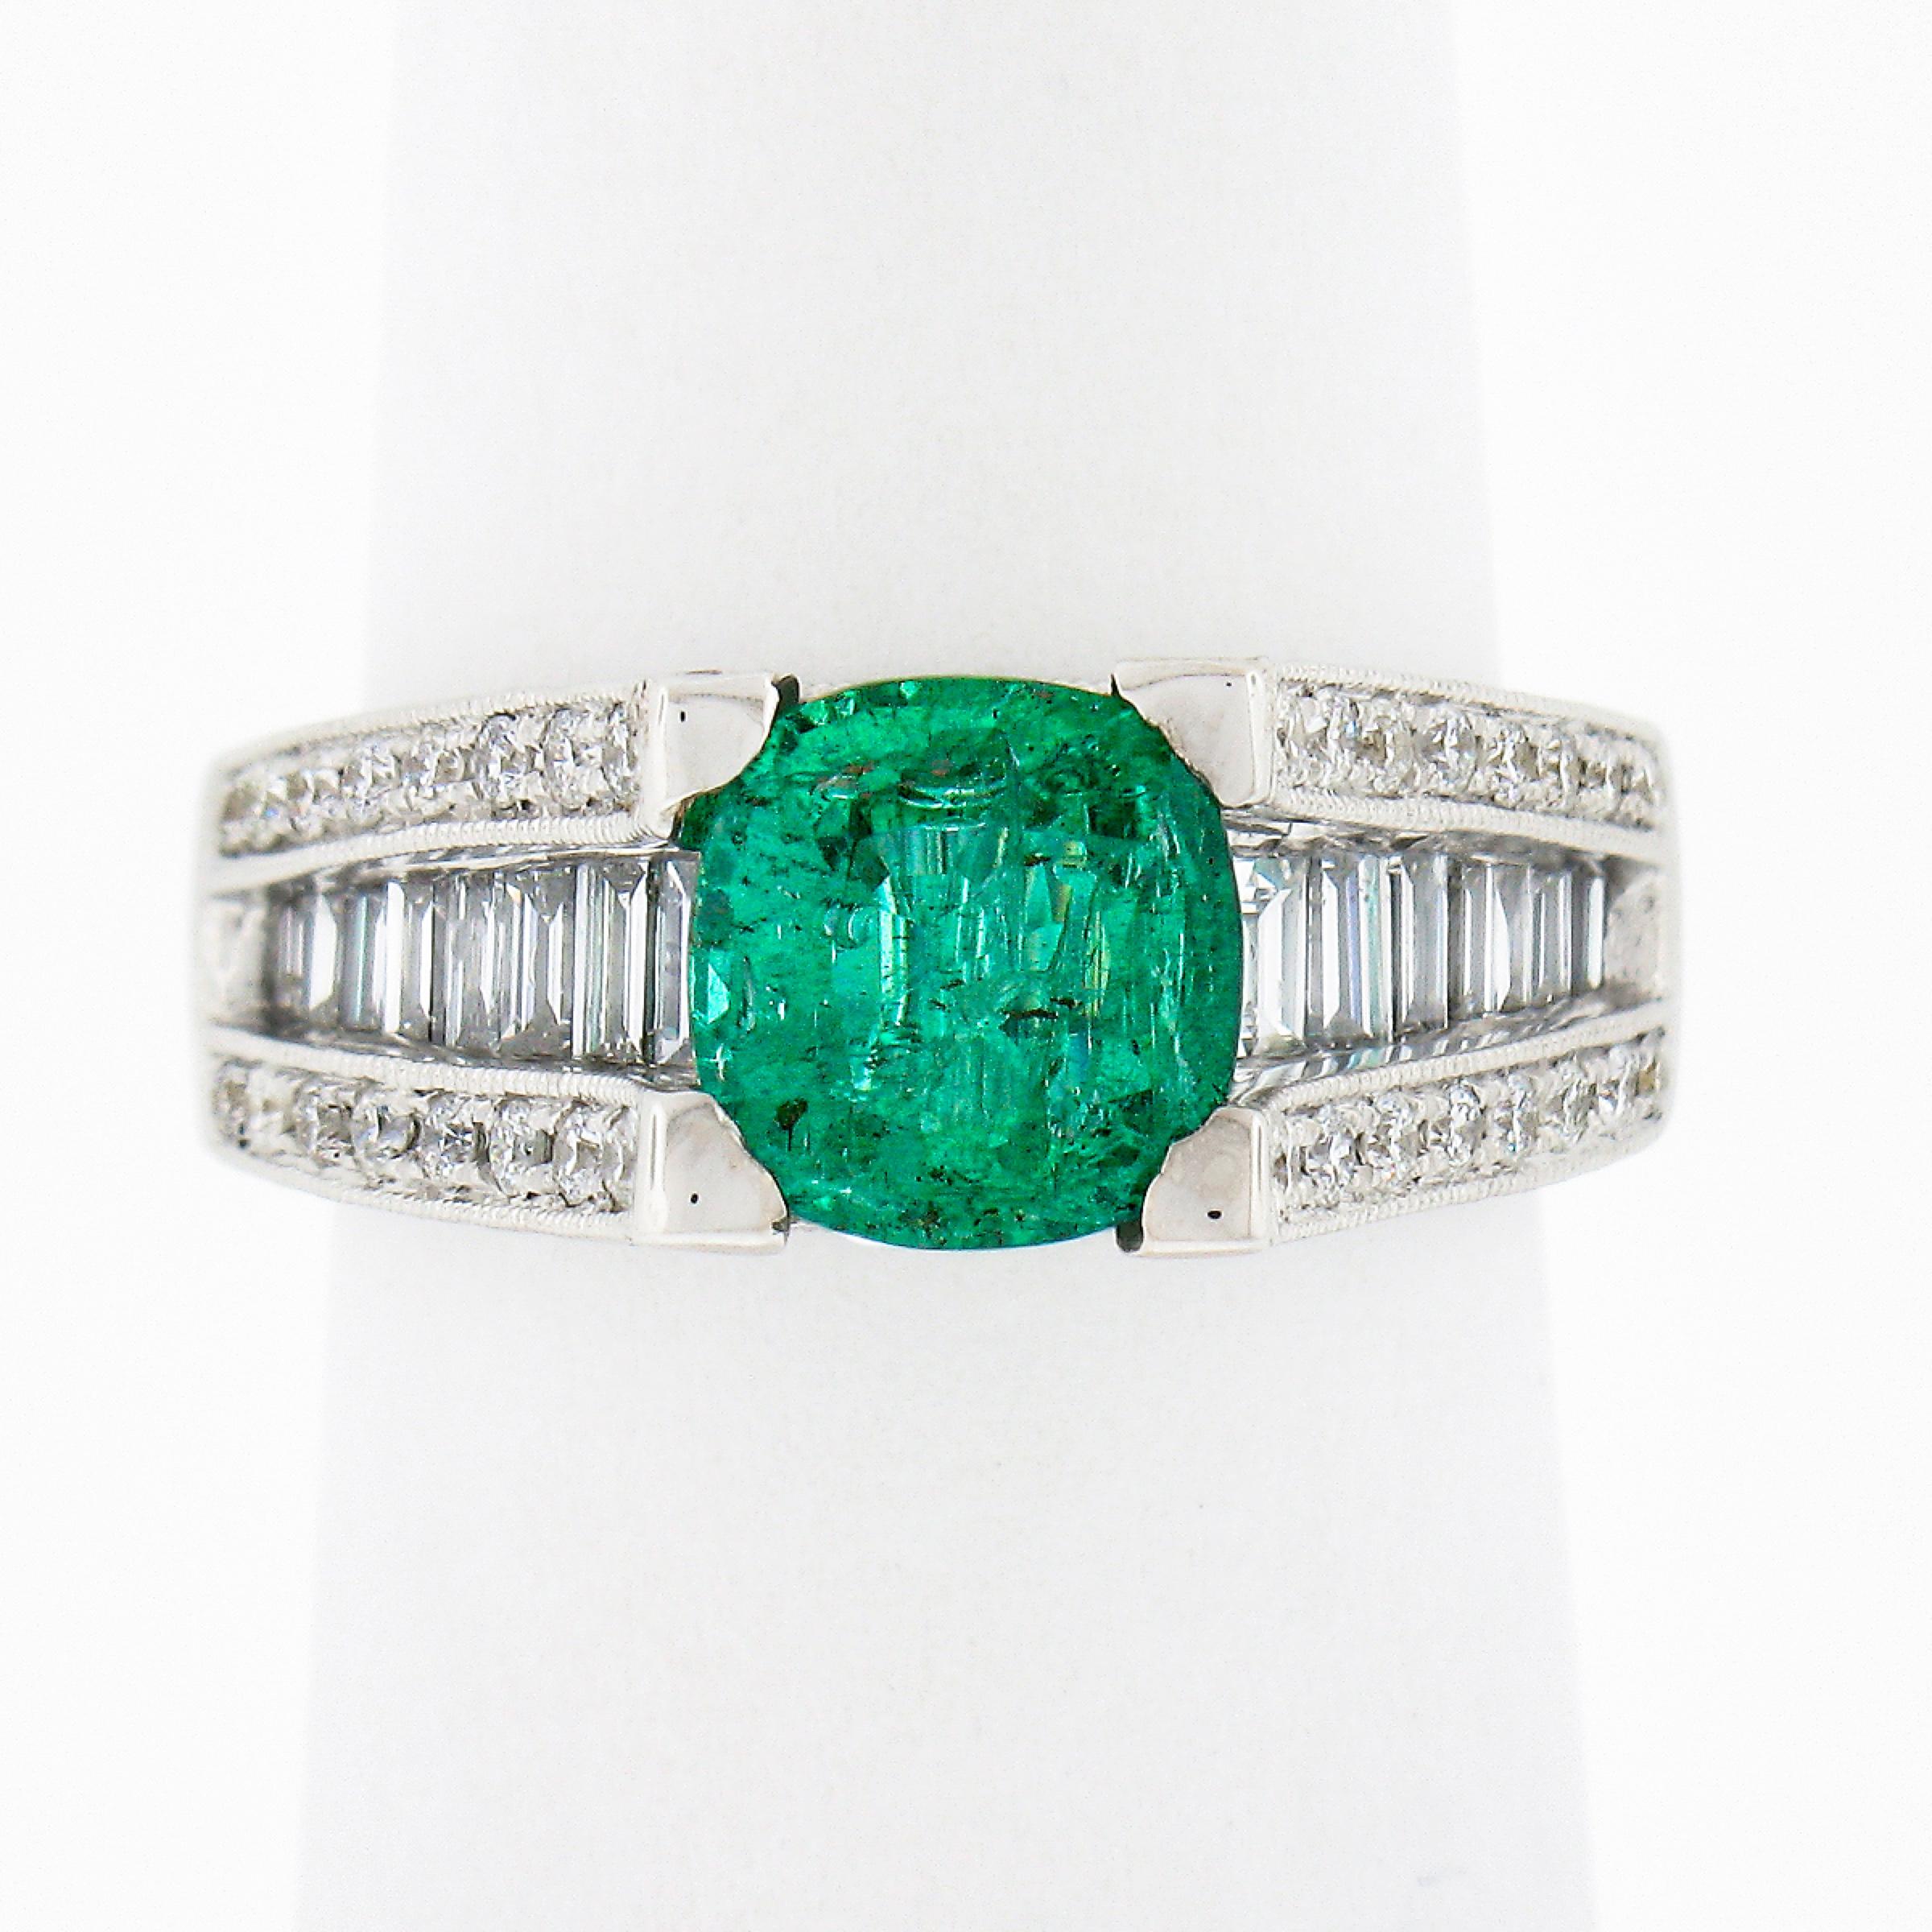 This breathtaking cocktail or engagement style ring is crafted from solid 18k white gold. It features a stunning, GIA certified, cushion cut emerald solitaire elegantly prong set above a magnificent channel of baguette cut diamonds. The emerald is a